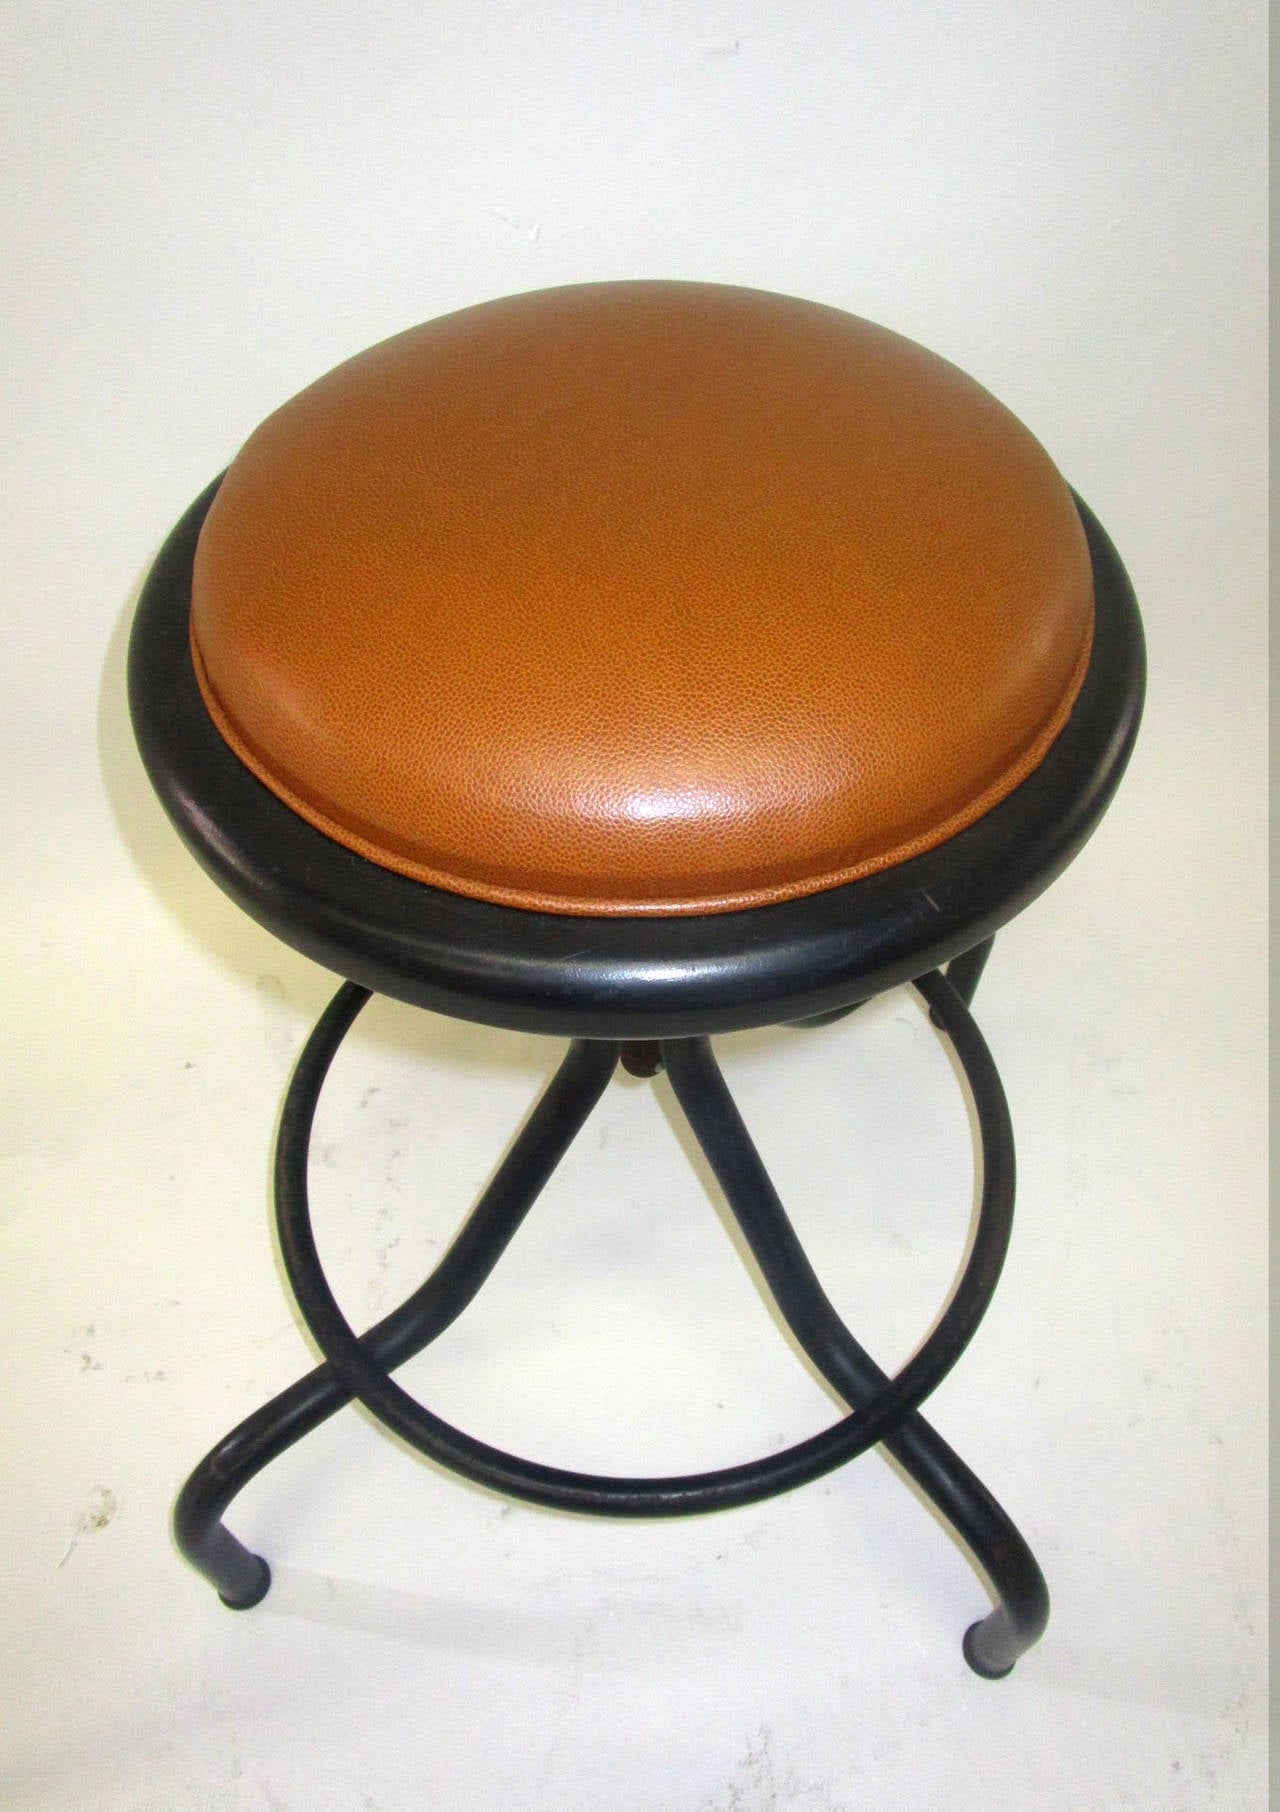 Industrial style set of 4 black metal adjustable work bench stool with brown leather upholstered seat.  Sitting on matte black powder coat original finish frame. Adjustable height by turning of knob.

Seat Diameter: 15